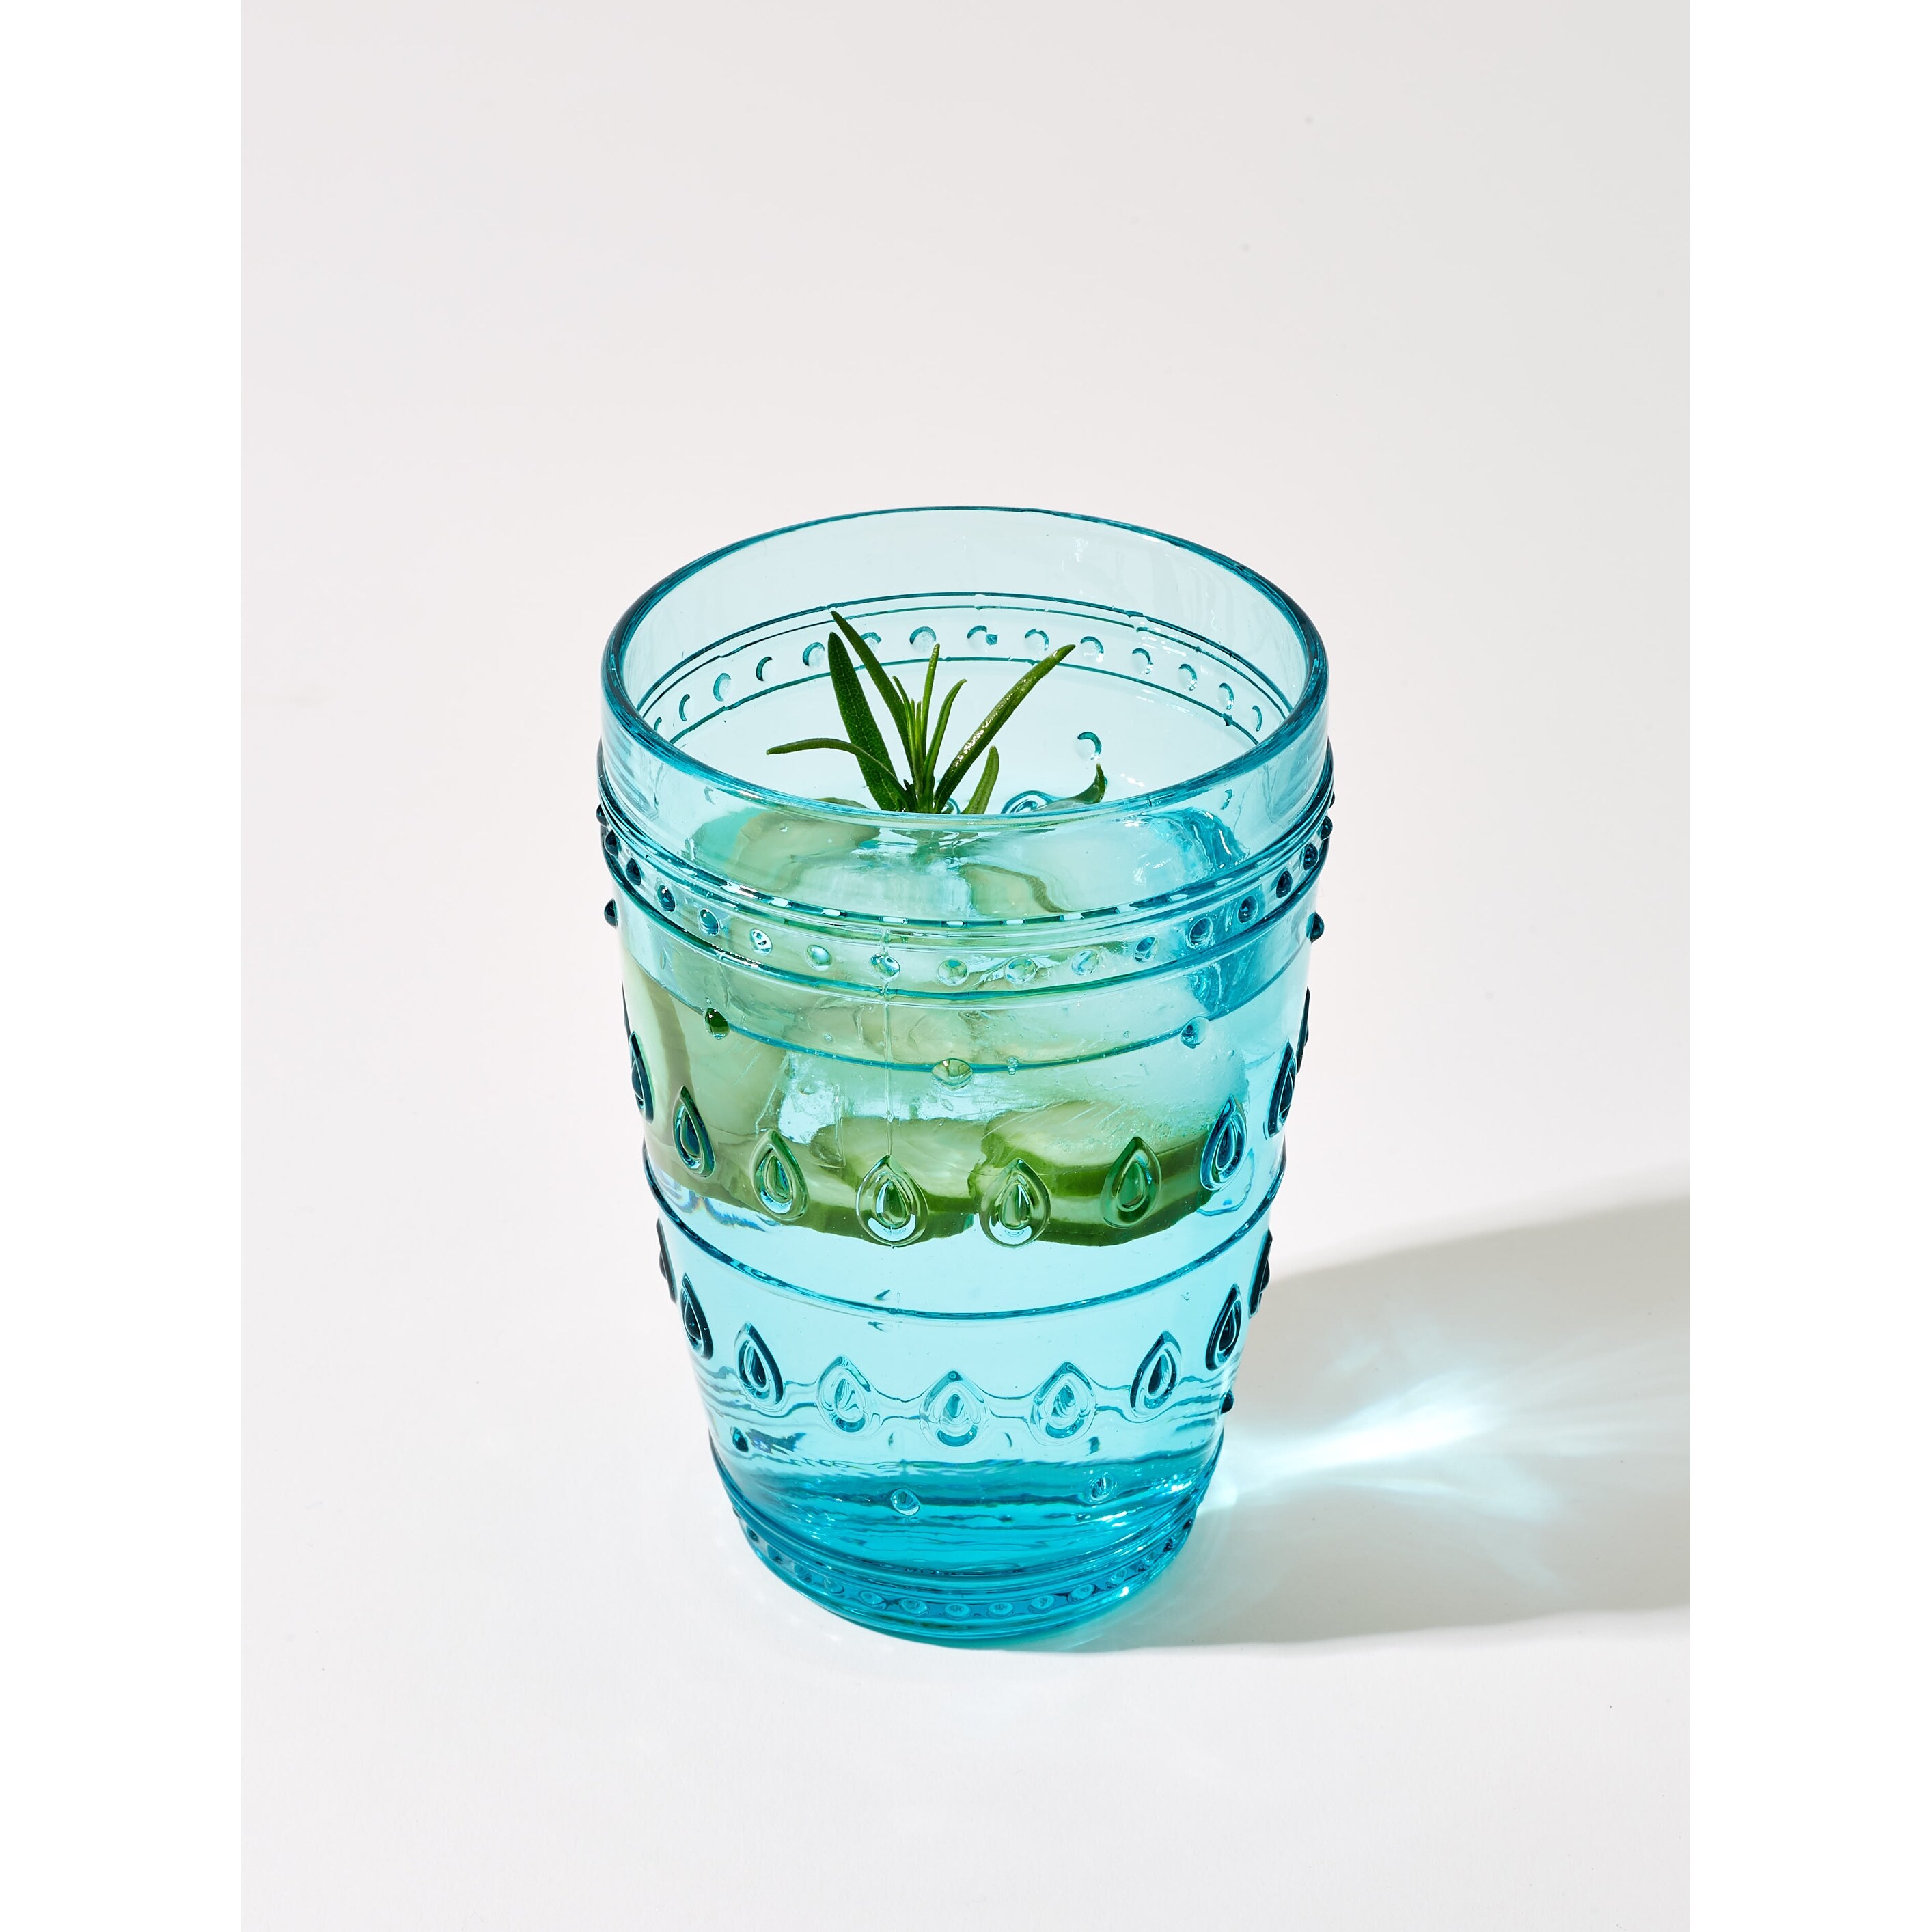 https://ak1.ostkcdn.com/images/products/is/images/direct/bbd69dc67280011c0b55fe02079aacbdb422f5bb/Euro-Ceramica-Fez-14-ounce-Highball-Glasses-%28Set-of-4%29.jpg